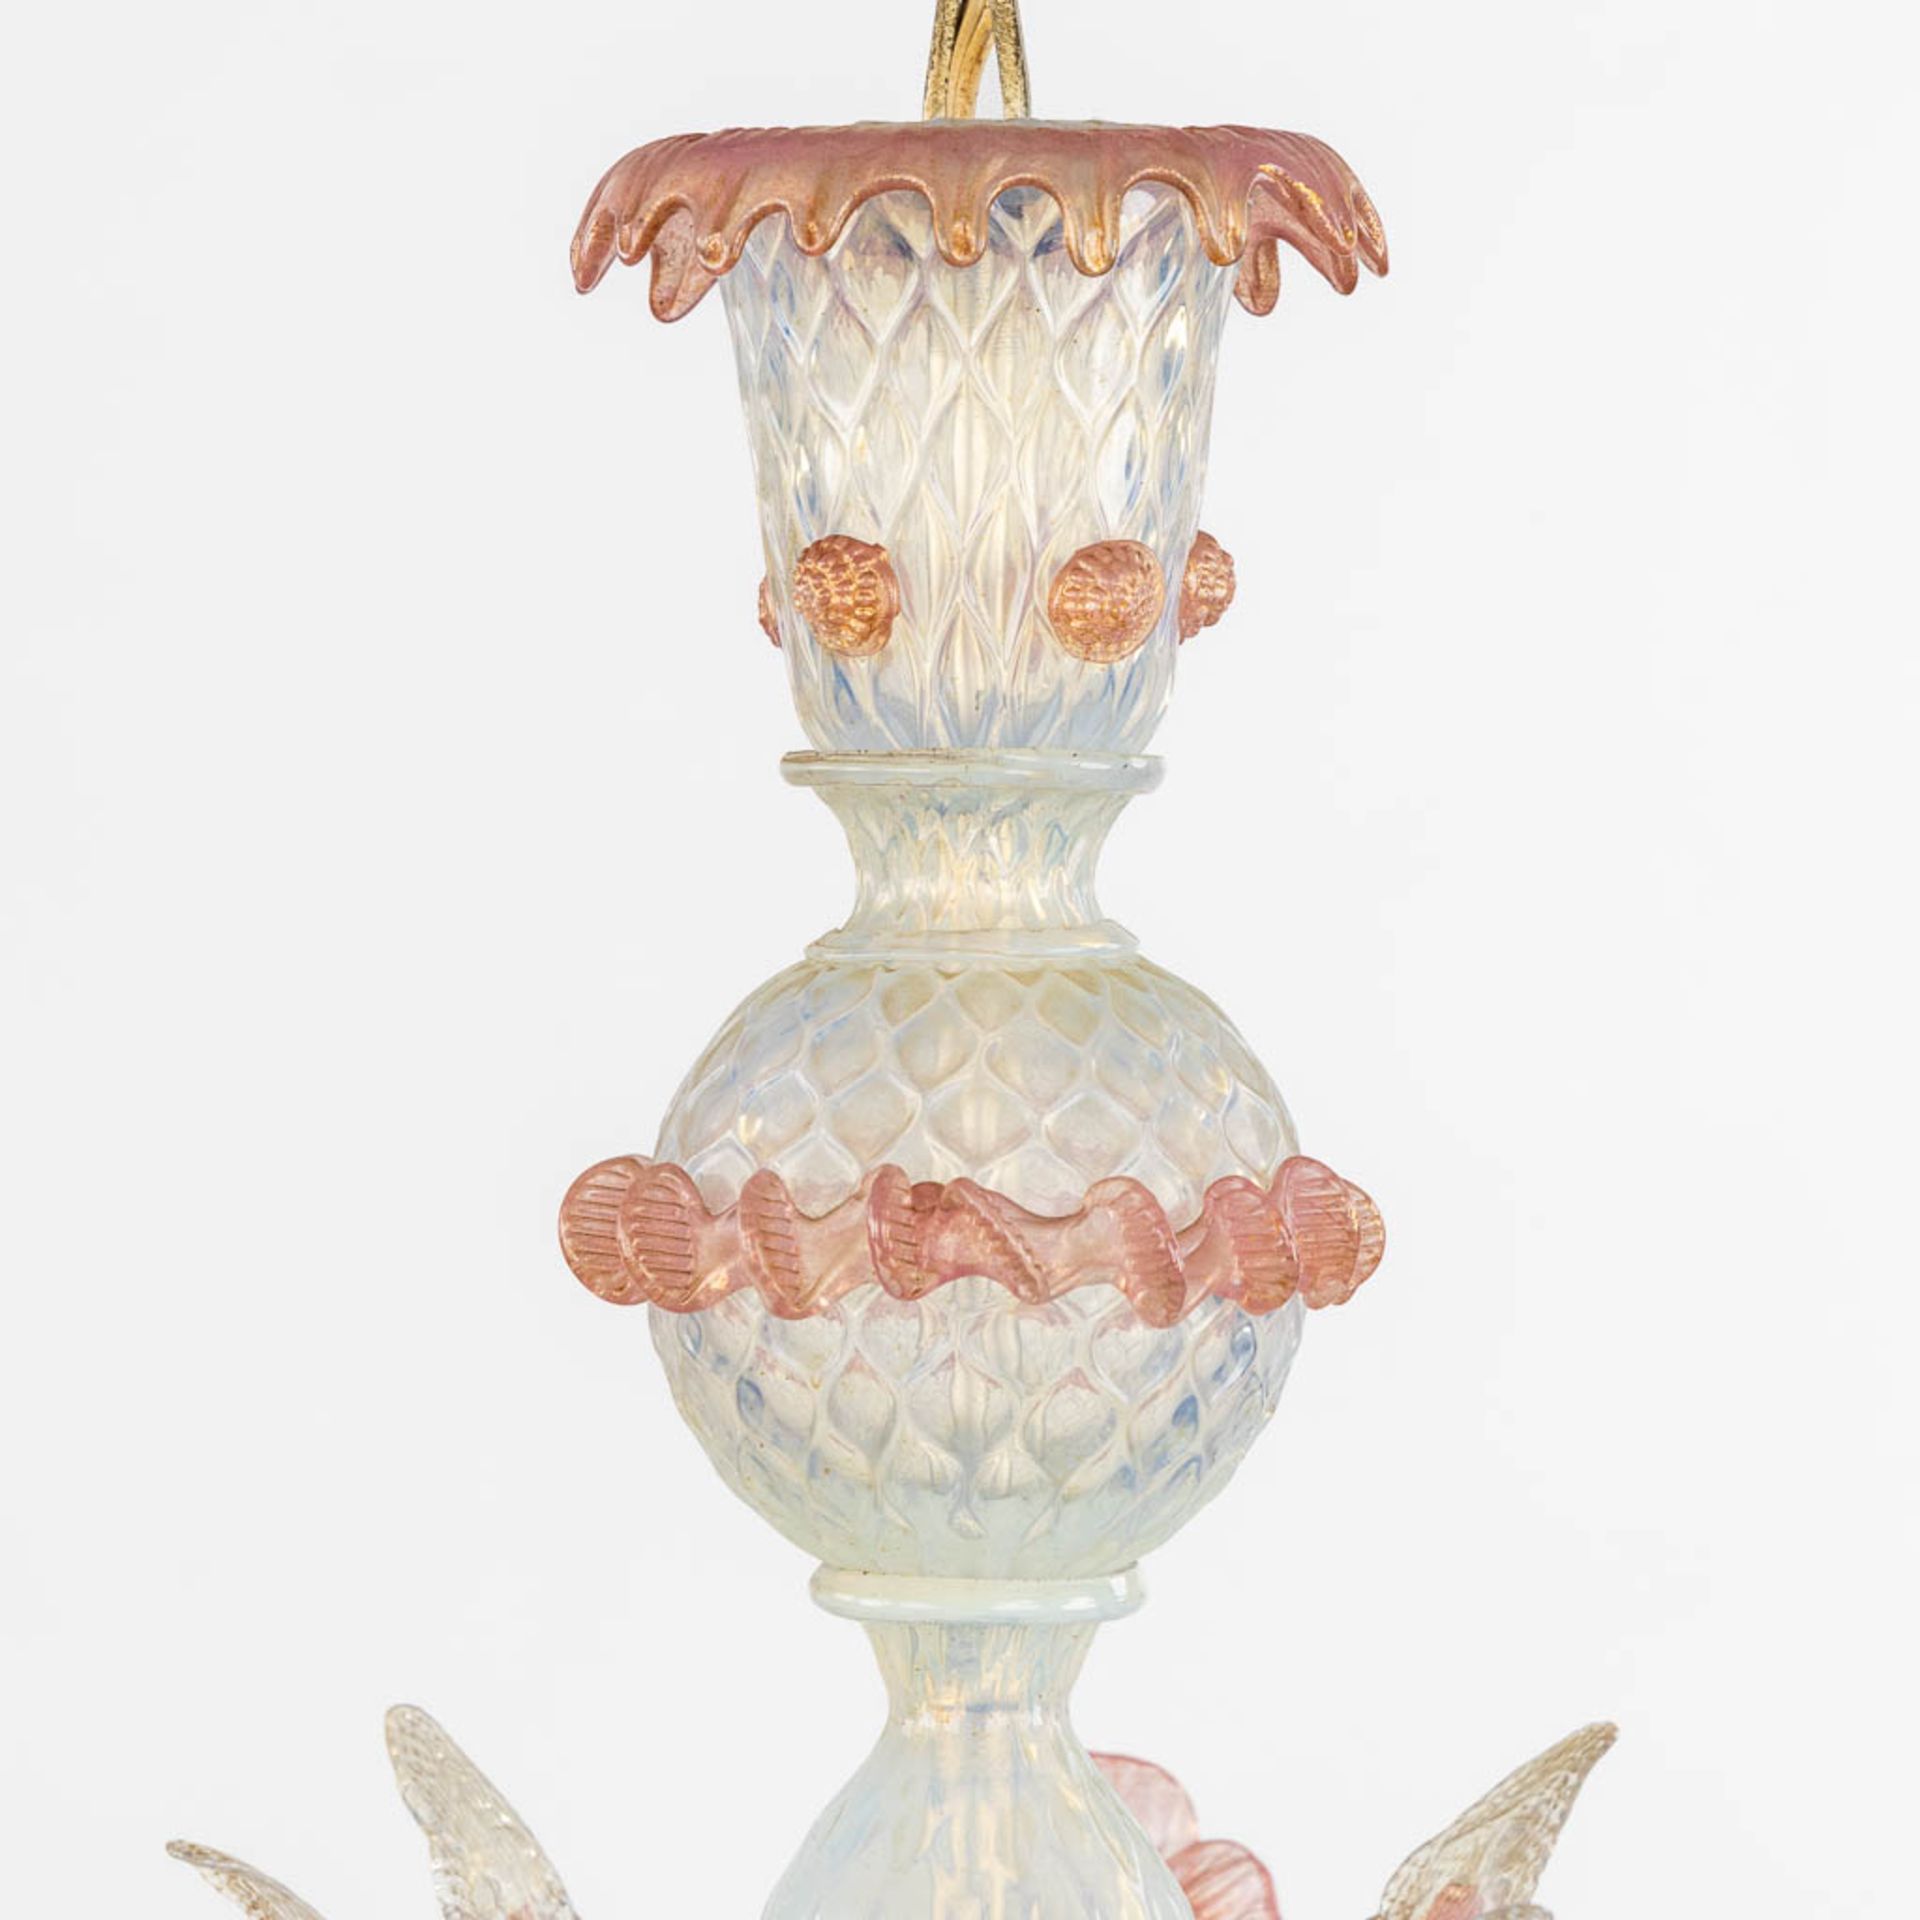 A decorative Venetian glass chandelier, red and white glass. 20th C. (H:70 x D:54 cm) - Image 4 of 12